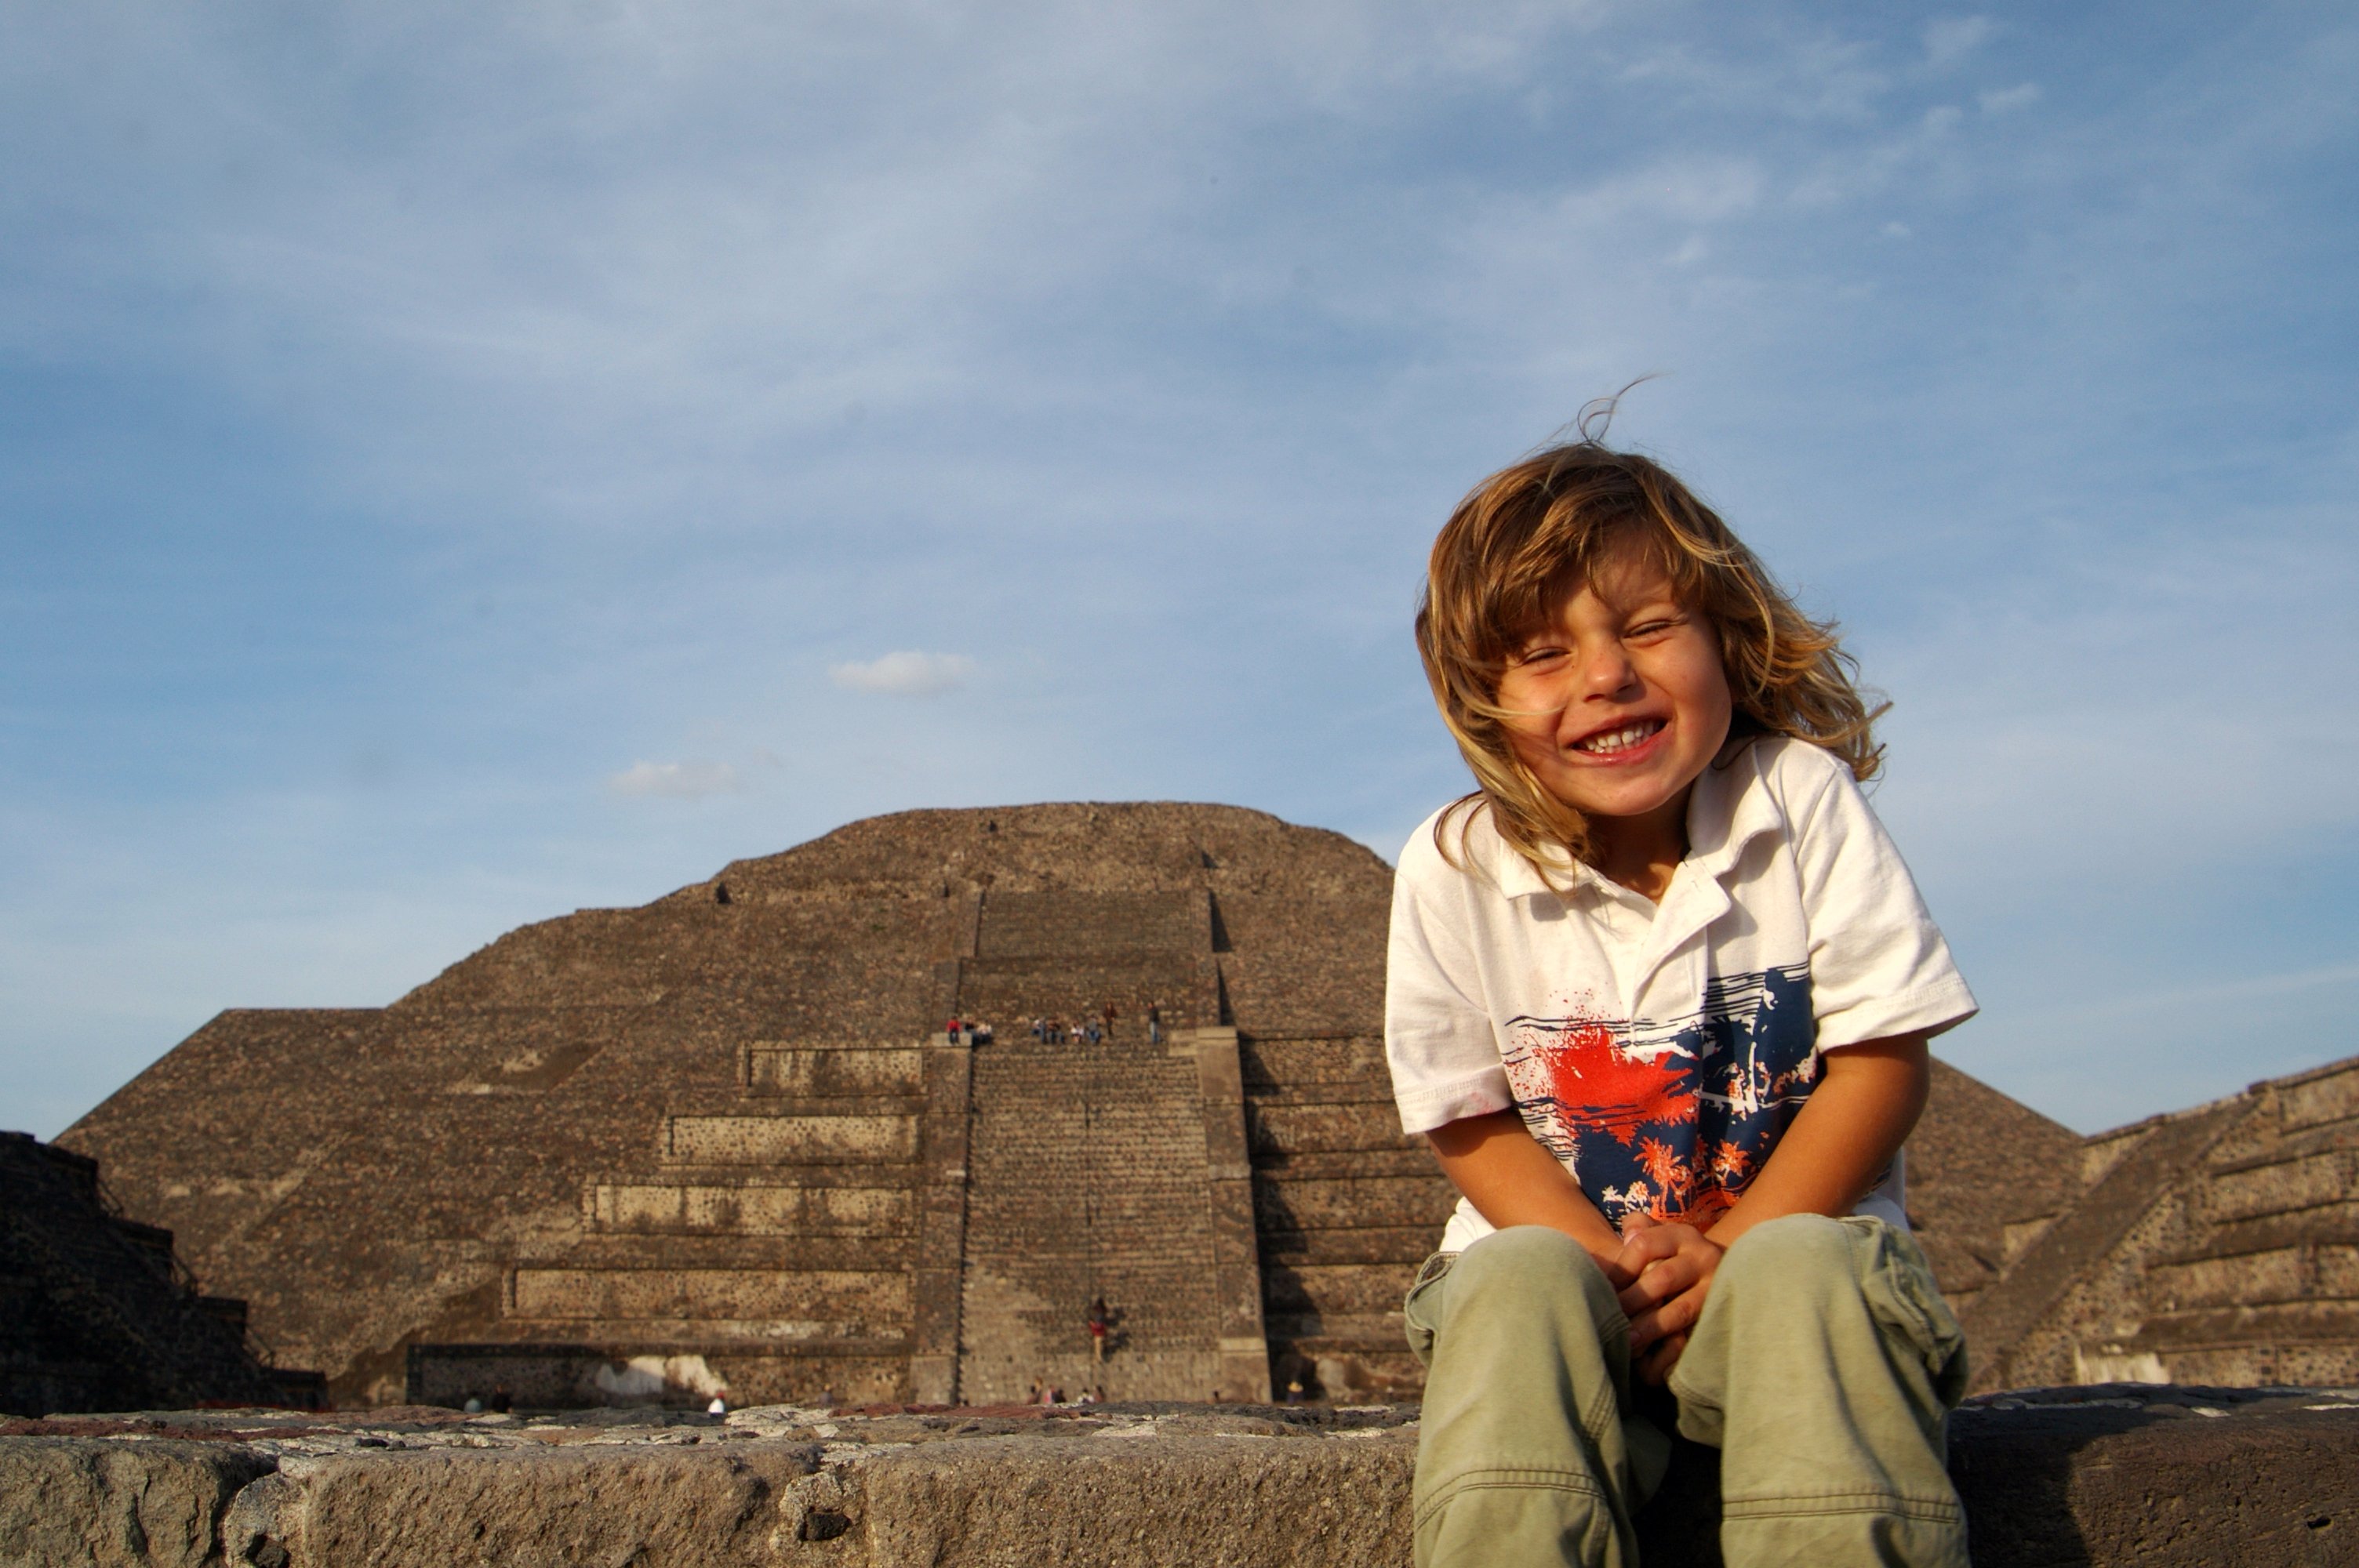 Alex sitting in front of the Pyramid of the Sun